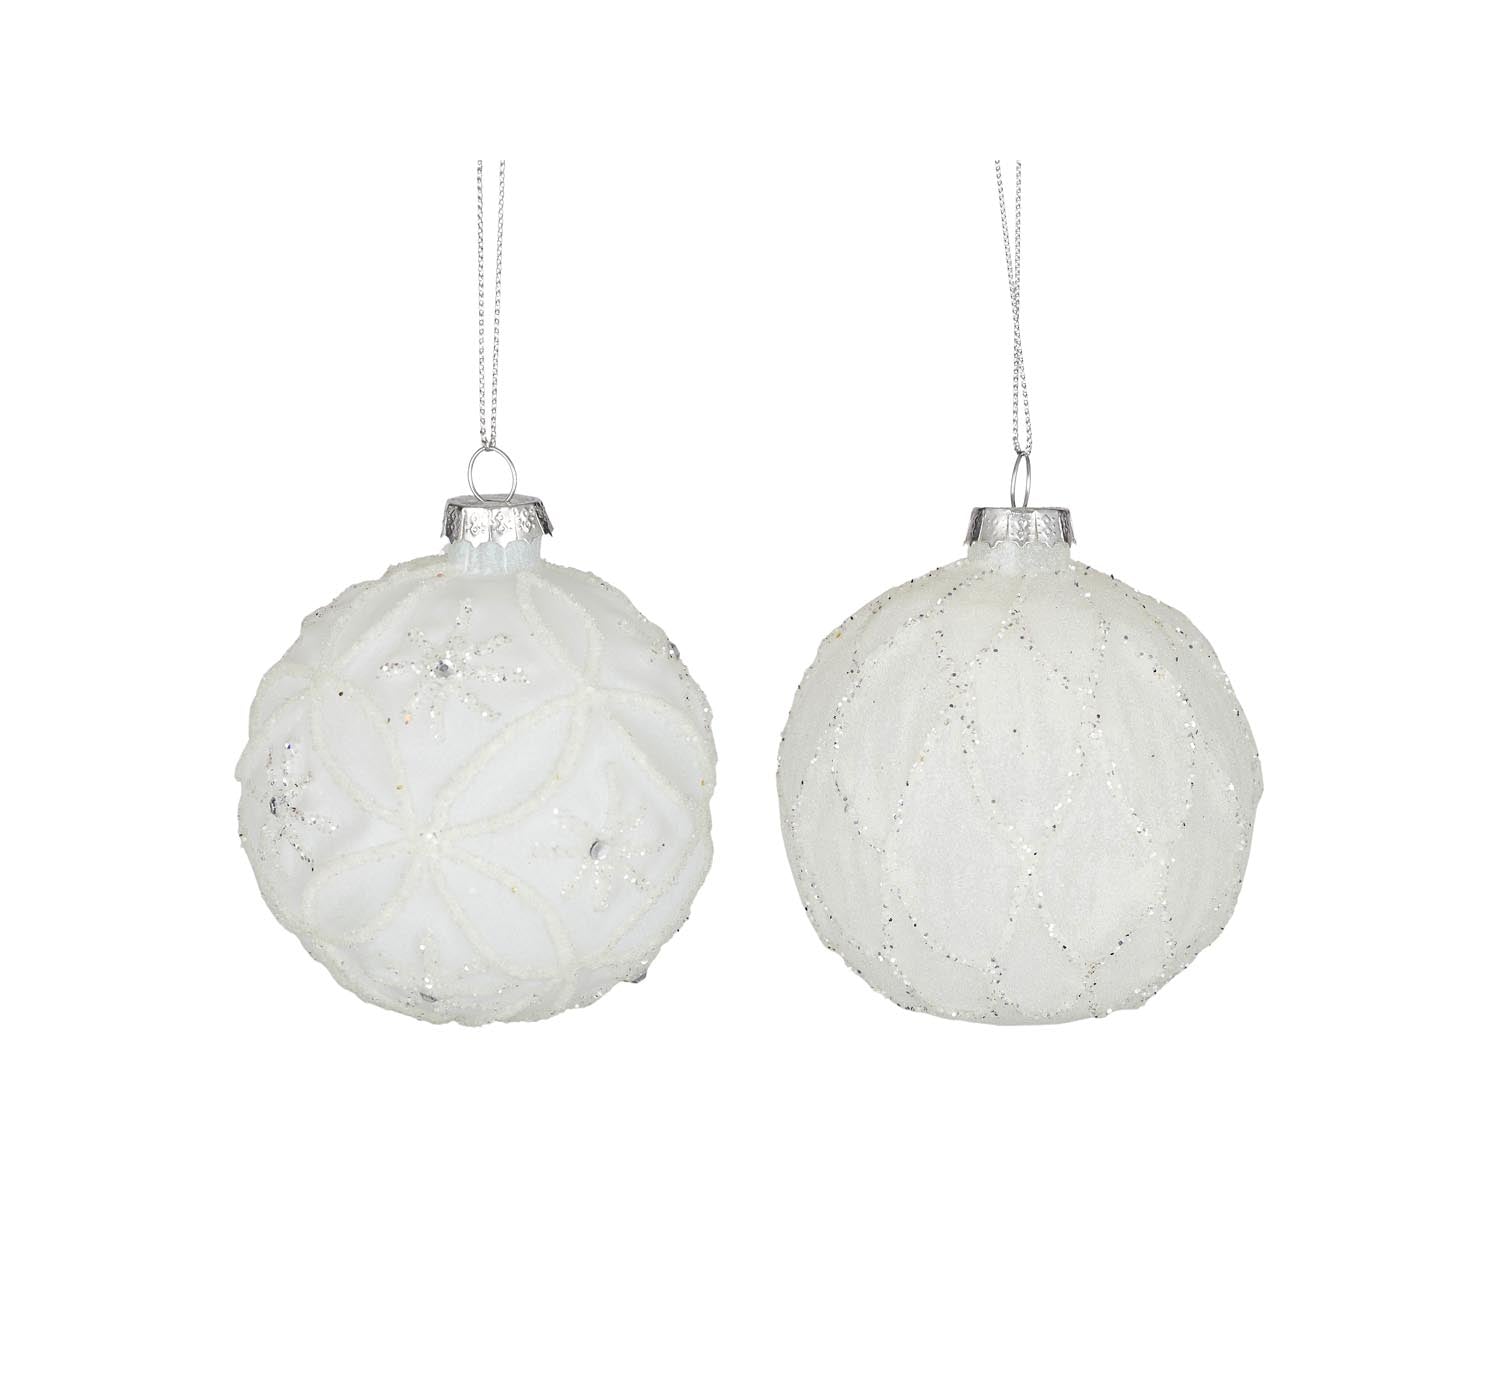 Sparkle Glass Bauble White/Silver Assorted - Gro Urban Oasis